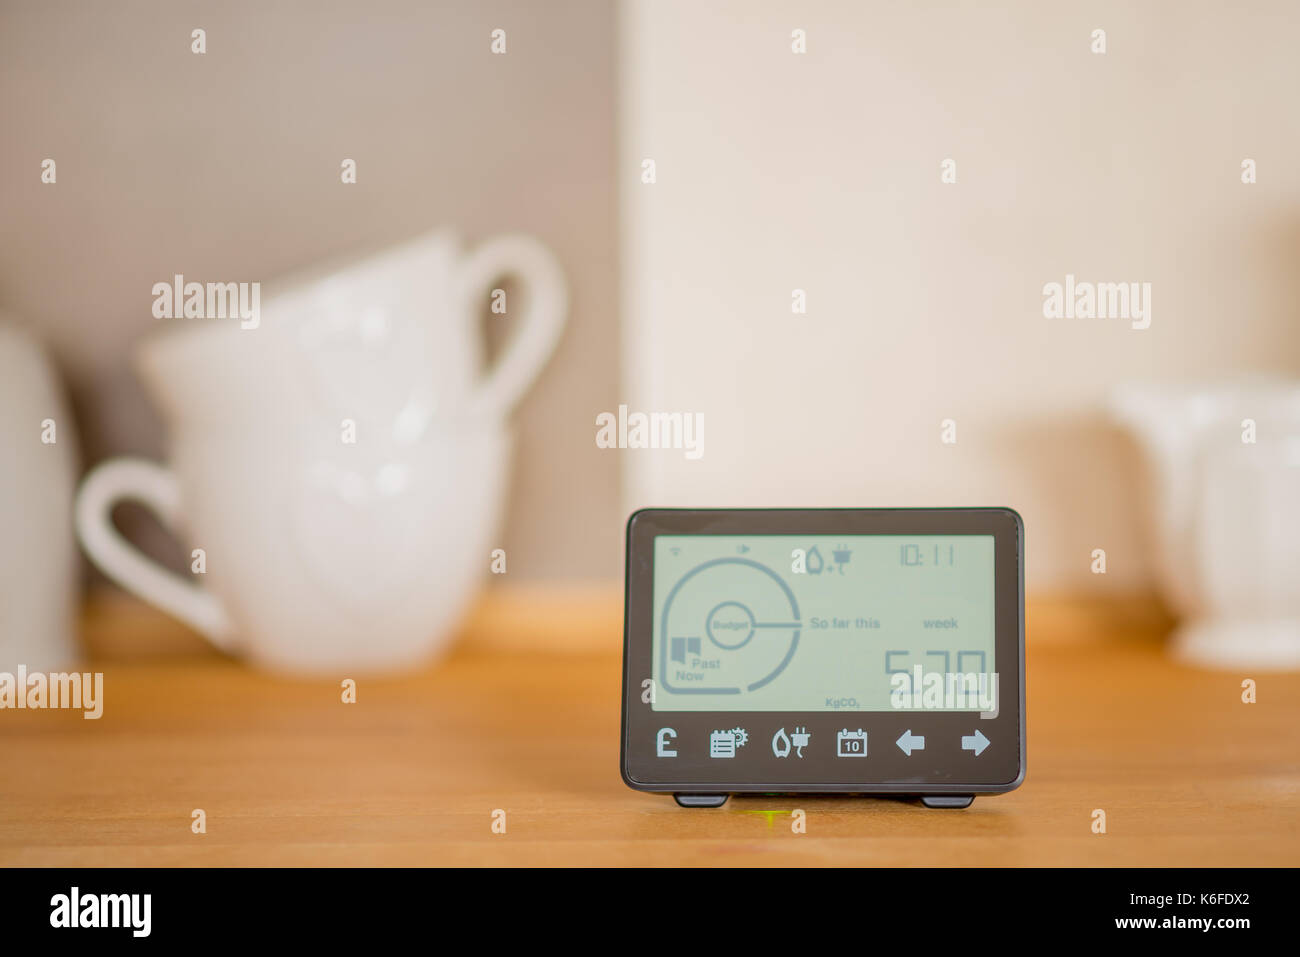 Smart meter on wooden kitchen counter. Stock Photo